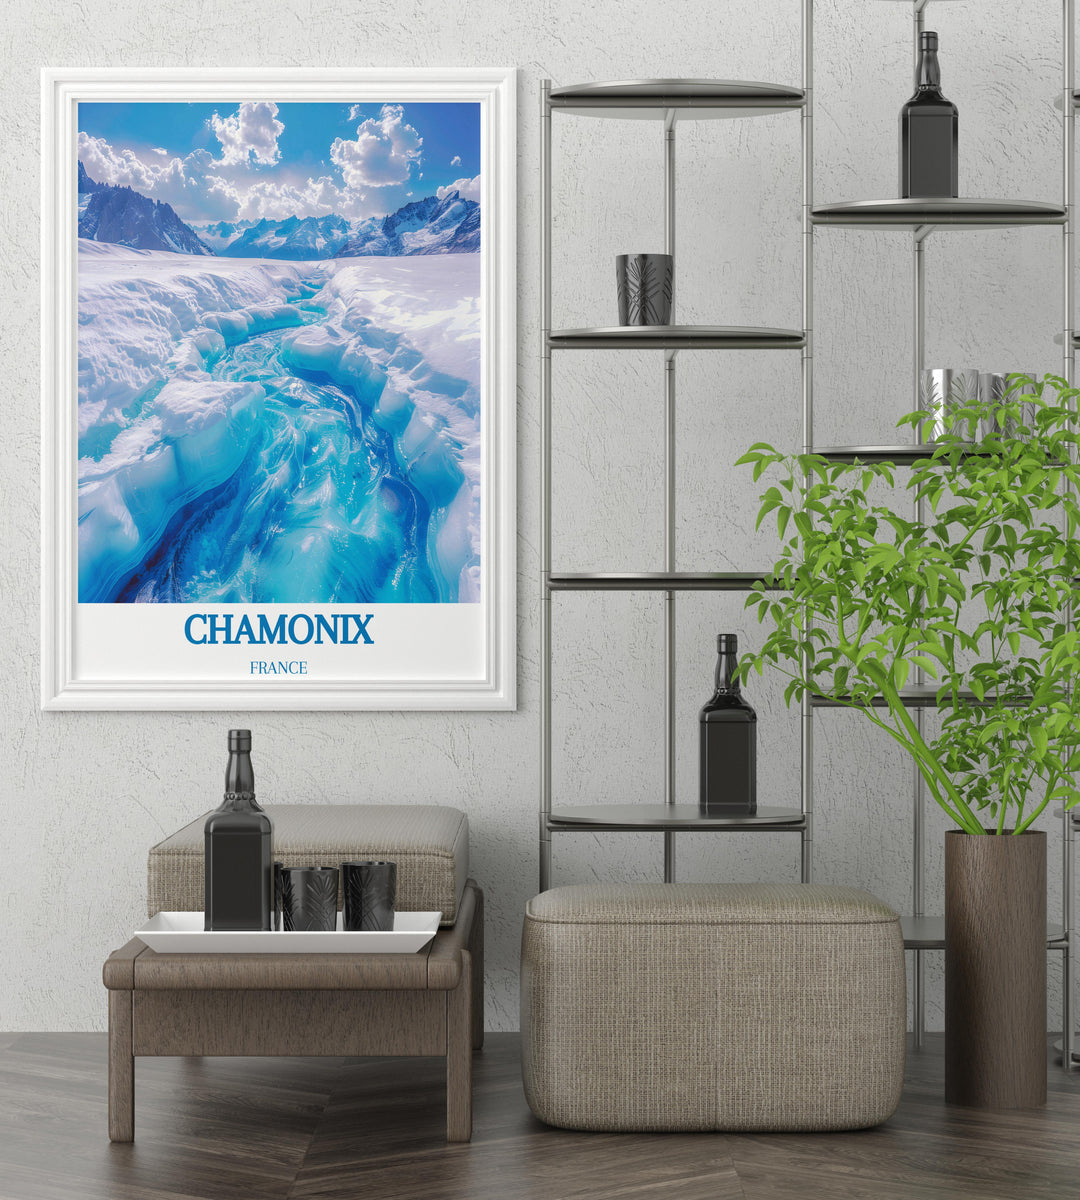 Winter at Mer de Glace, showcasing skiers and pristine snowscapes in a vibrant travel art print